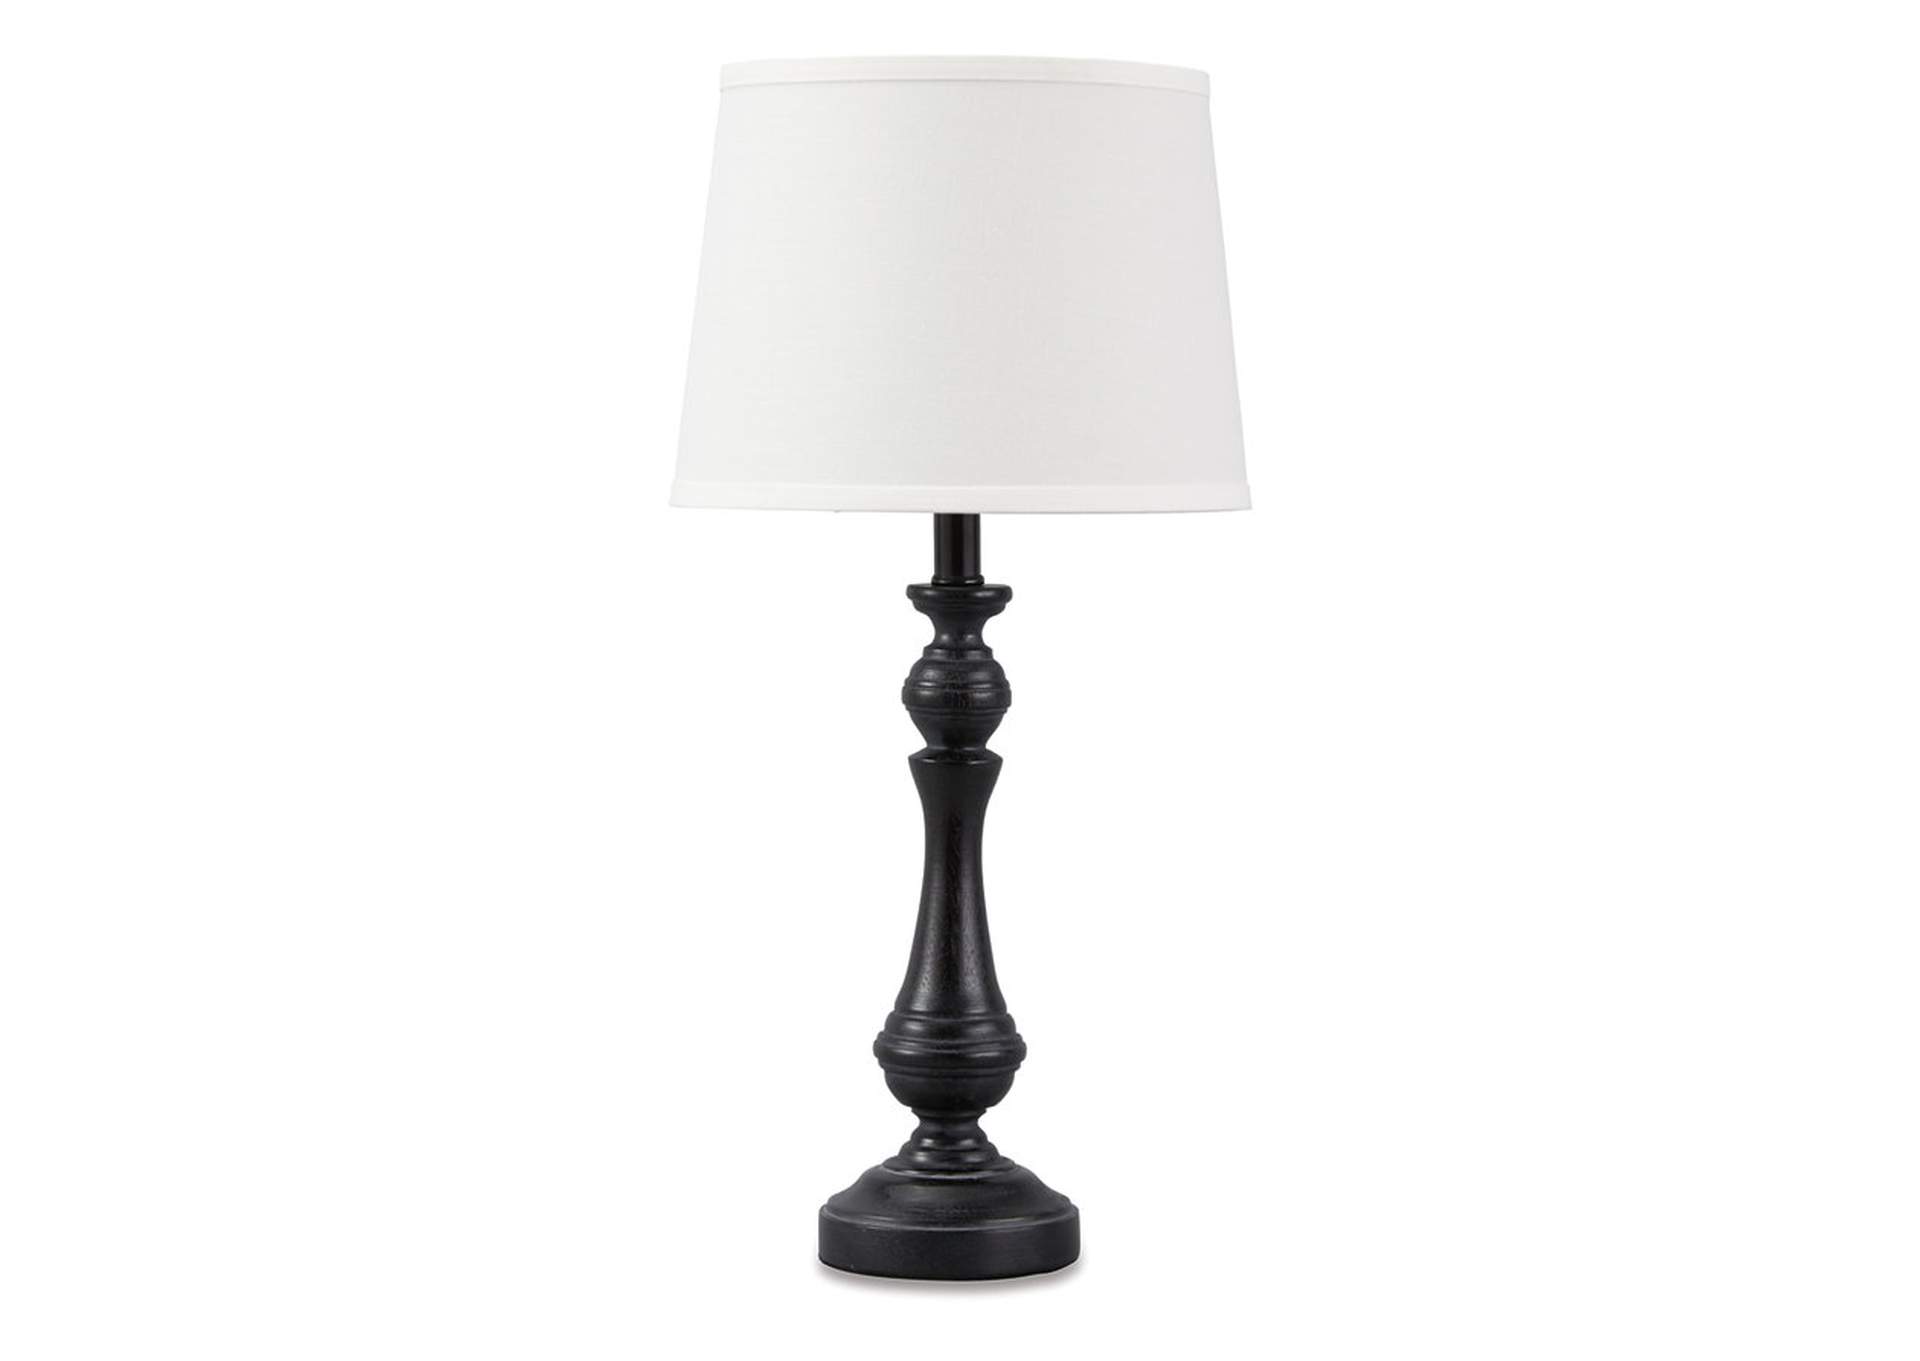 Kian Table Lamp,Direct To Consumer Express